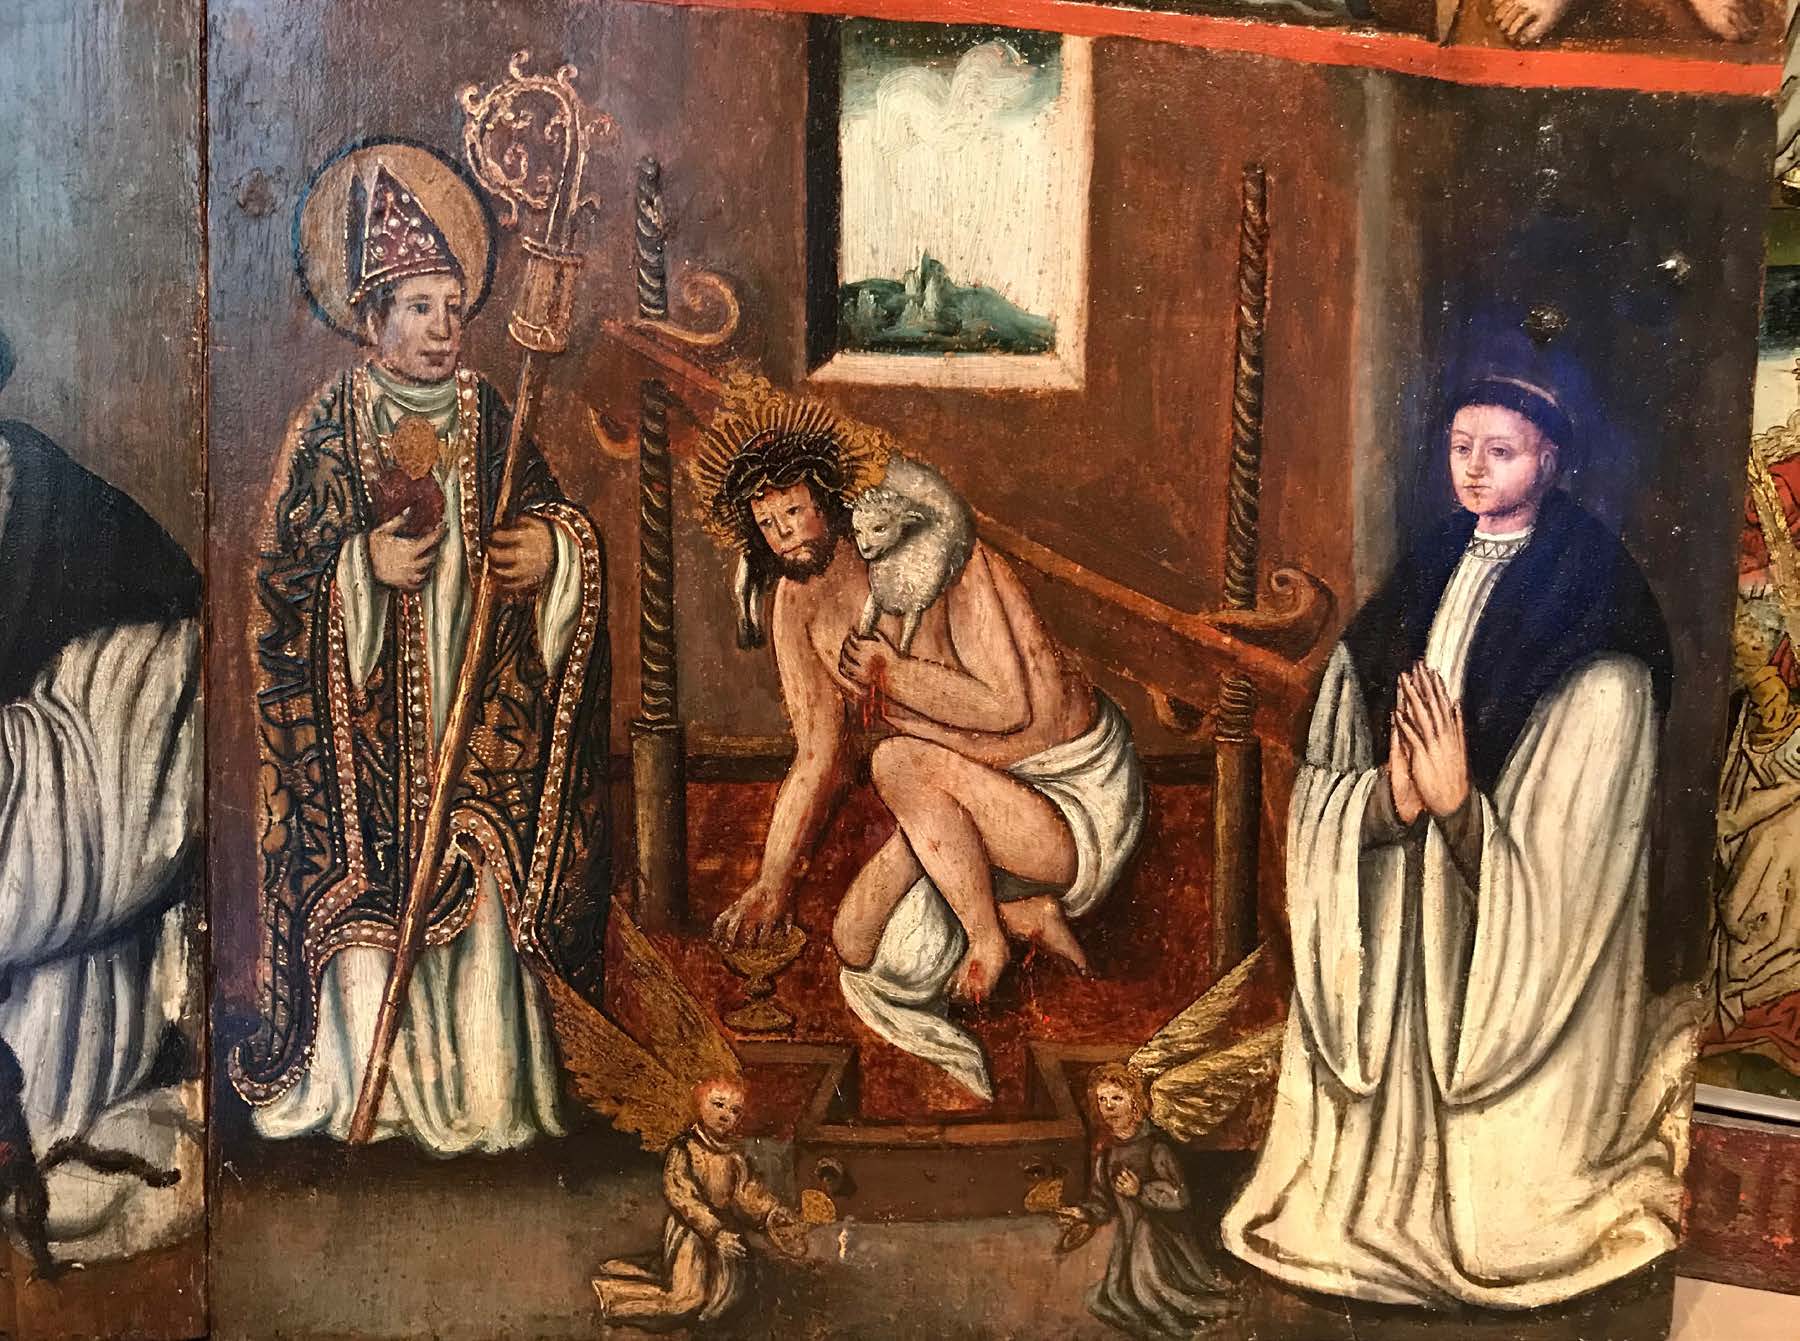 The image of Christ being pressed in a winepress showed his sufferings as the source of the life and mercy that we need. Theodosia-altaar, detail, 1545. Museum Catharijneconvent, Utrecht.